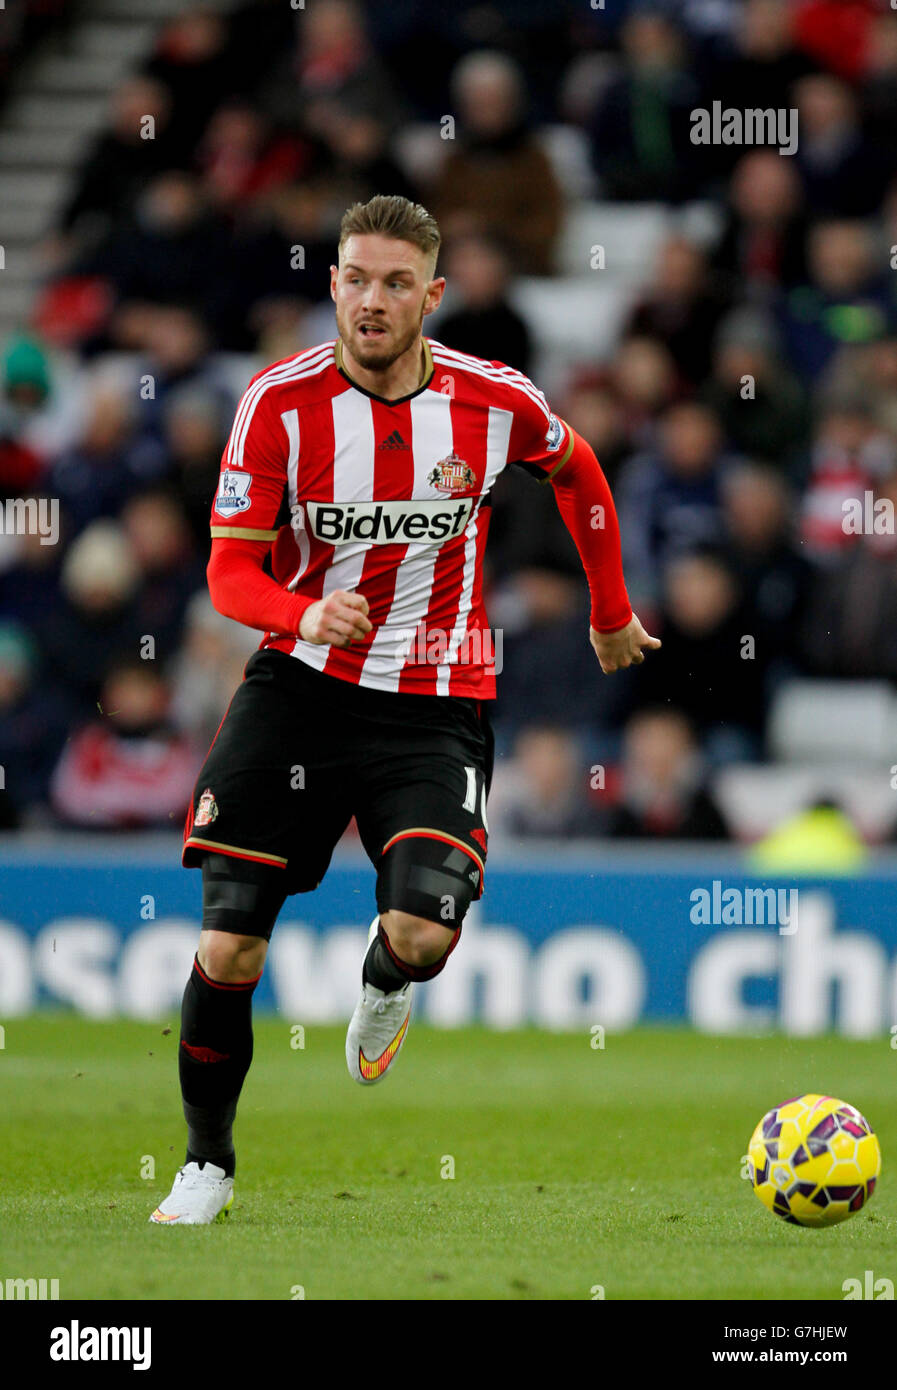 Sunderland's Connor Wickham during the Barclays Premier League match at the Stadium of Light, Sunderland. PRESS ASSOCIATION Photo. Picture date: Saturday December 13, 2014. See PA story SOCCER Sunderland. Photo credit should read Richard Sellers/PA Wire. Maximum 45 images during a match. No video emulation or promotion as 'live'. No use in games, competitions, merchandise, betting or single club/player services. No use with unofficial audio, video, data, fixtures or club/league logos. Stock Photo